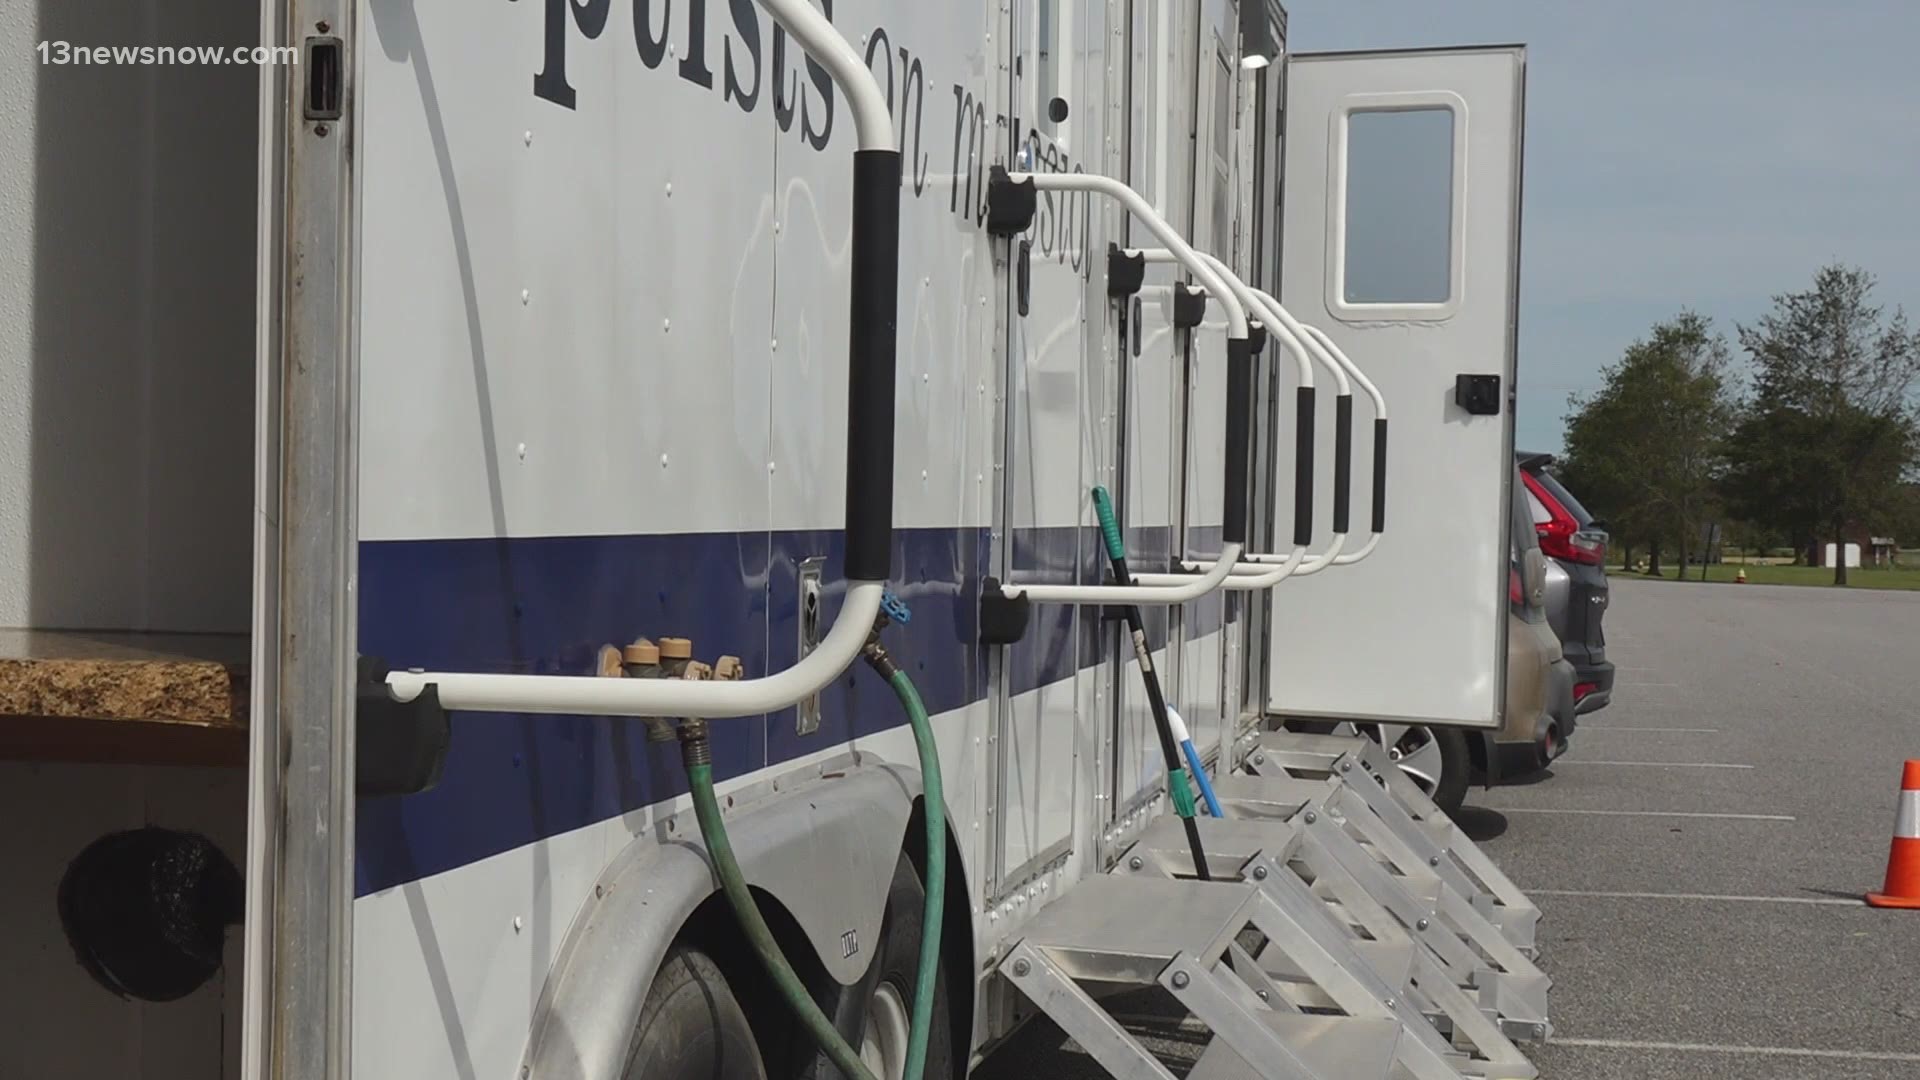 Southern Baptist Disaster Relief is allowing residents to shower and do laundry in their trailers while crews work to inspect every sewer system in the area.